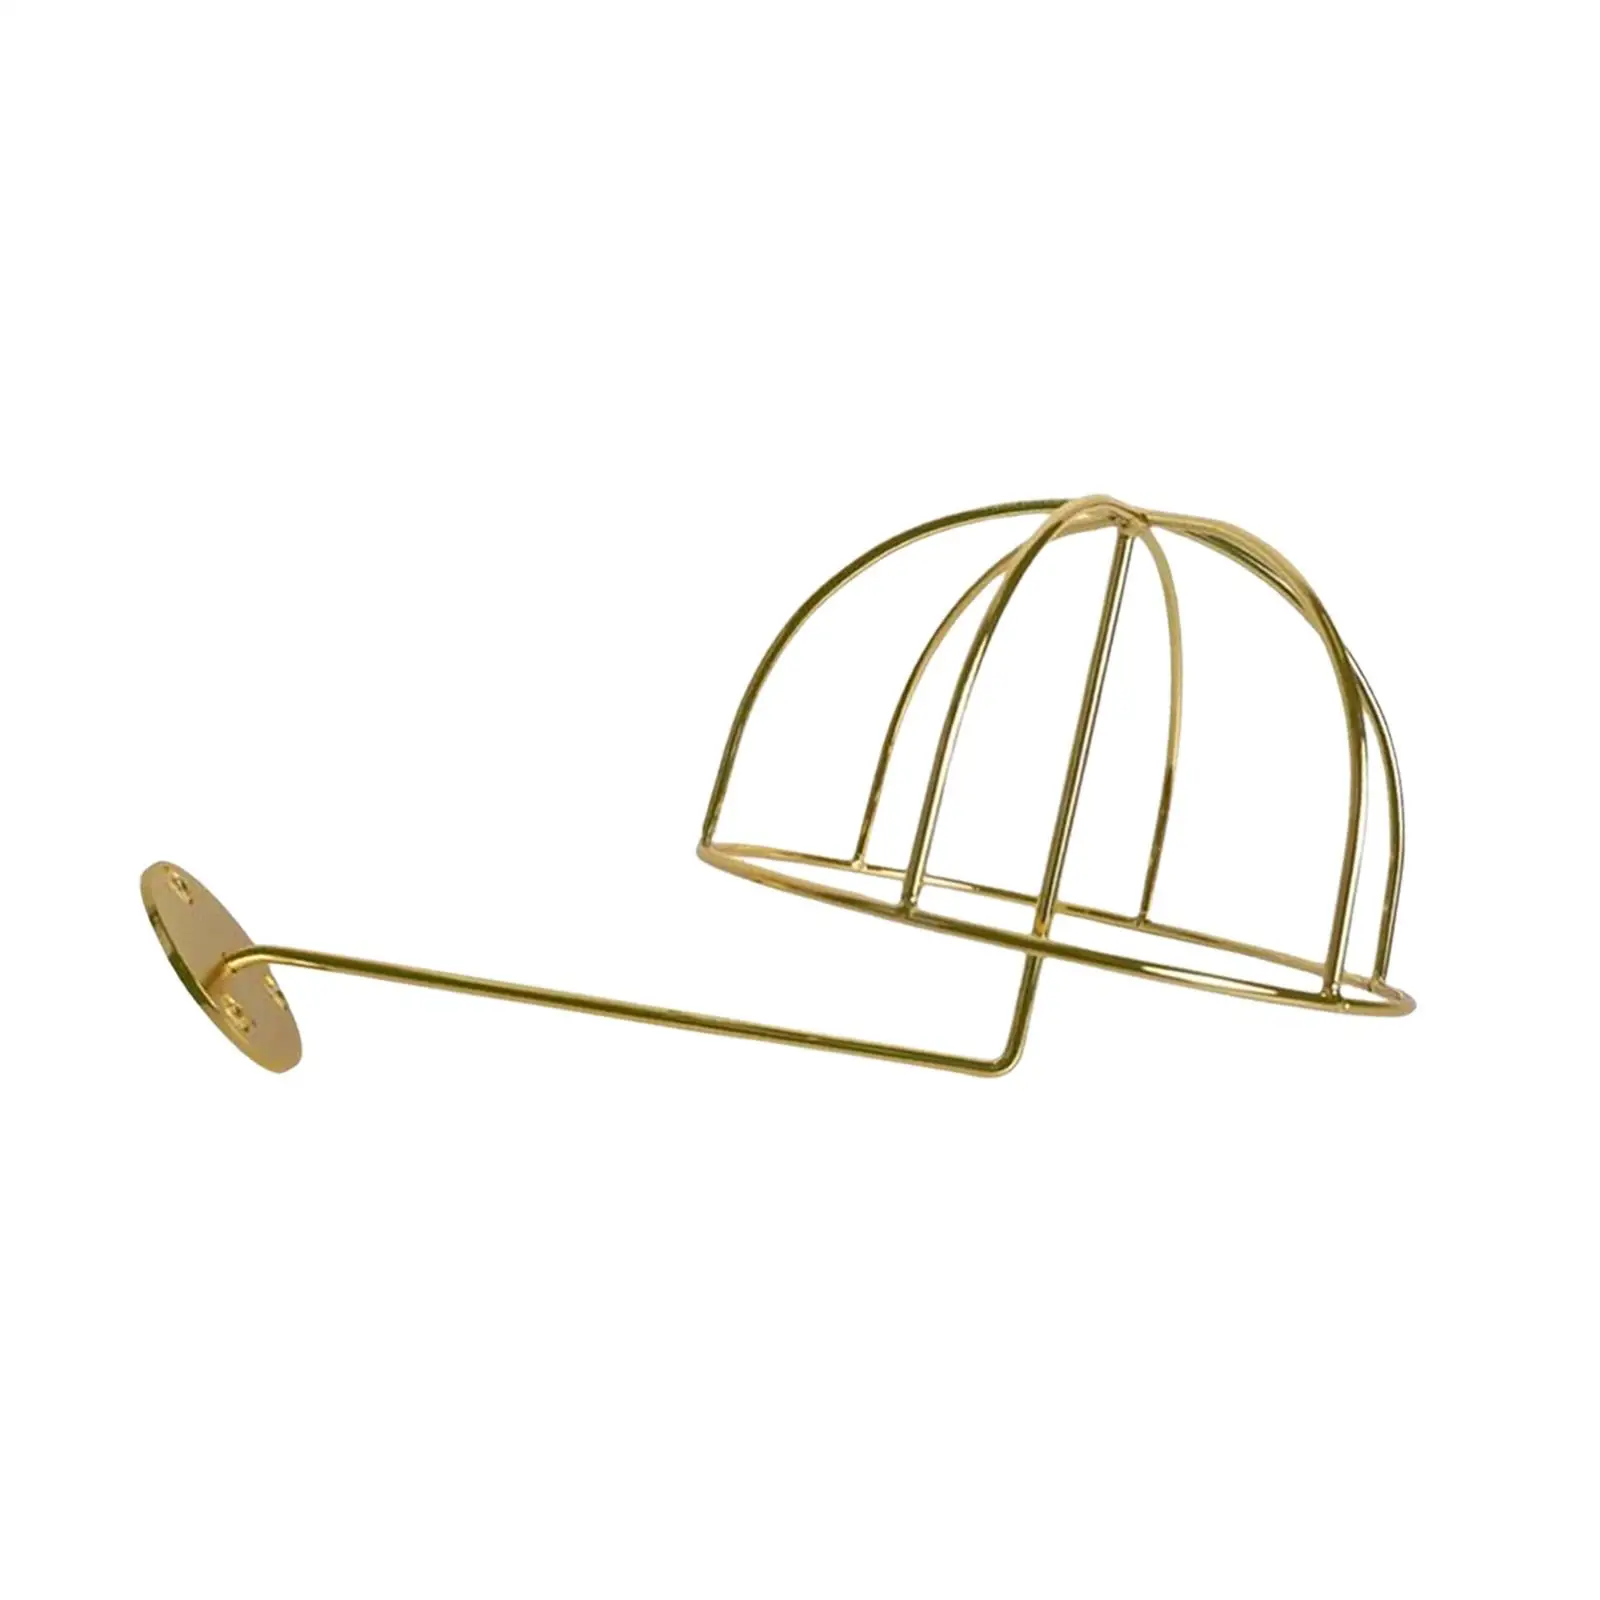 Metal Wire Hat Holder Wall Mounted Hat Rack Mounting On Doors, Closet Rods, Walls, Anywhere for Storing Hats, and Other Headgear